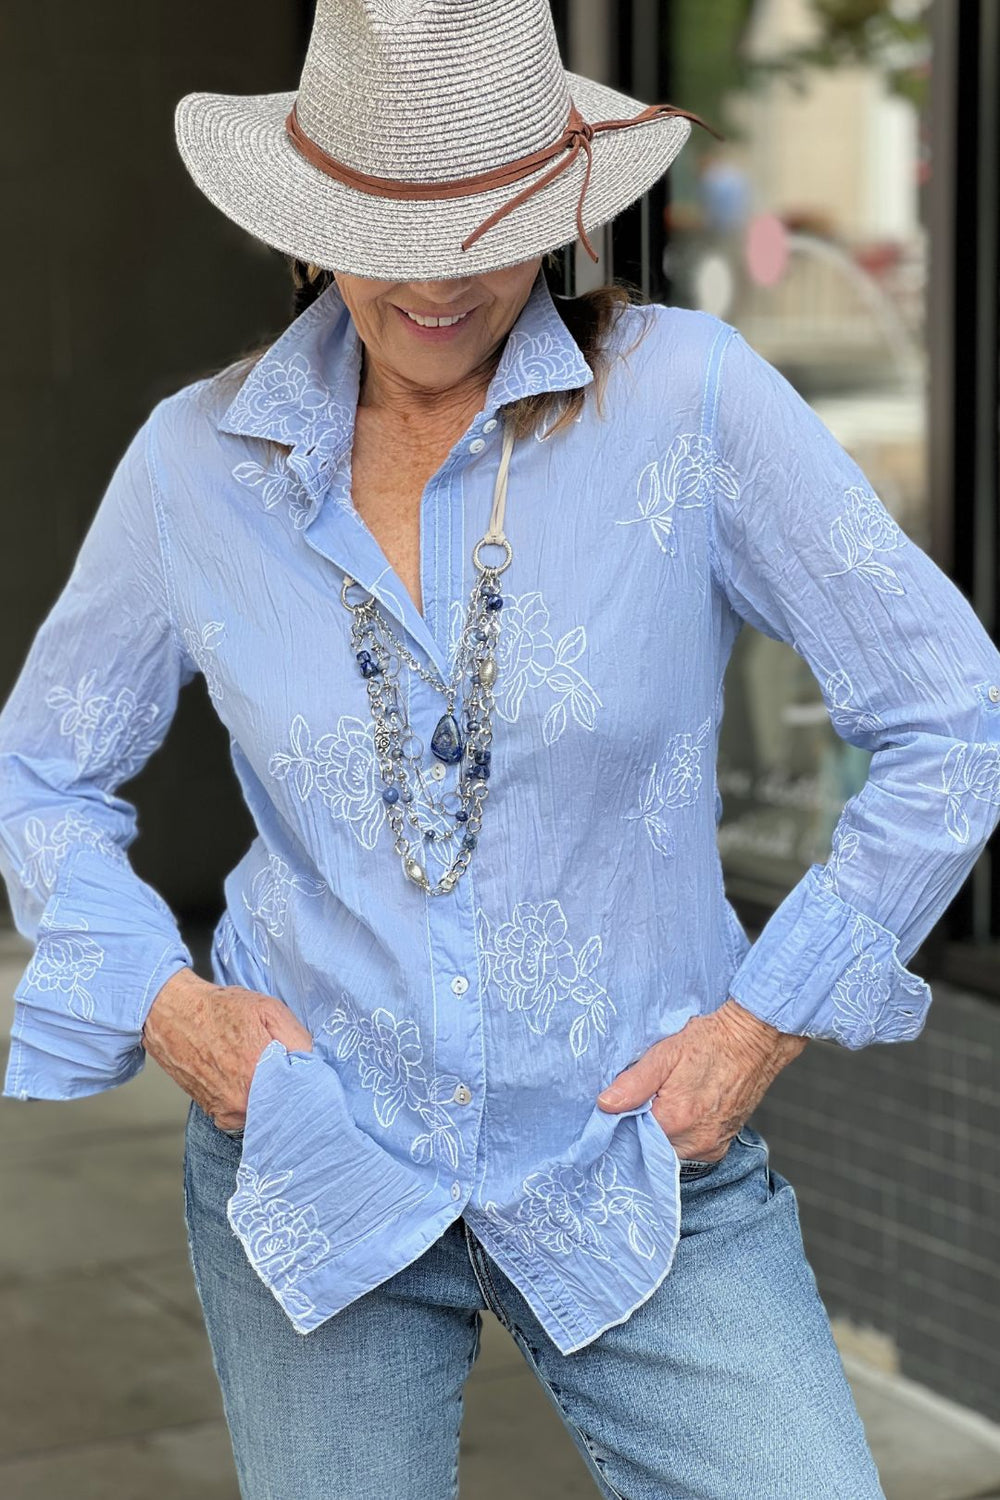 Cino Embroidered Crinkle Shirt at Adlib Clothing in Asheville, NC